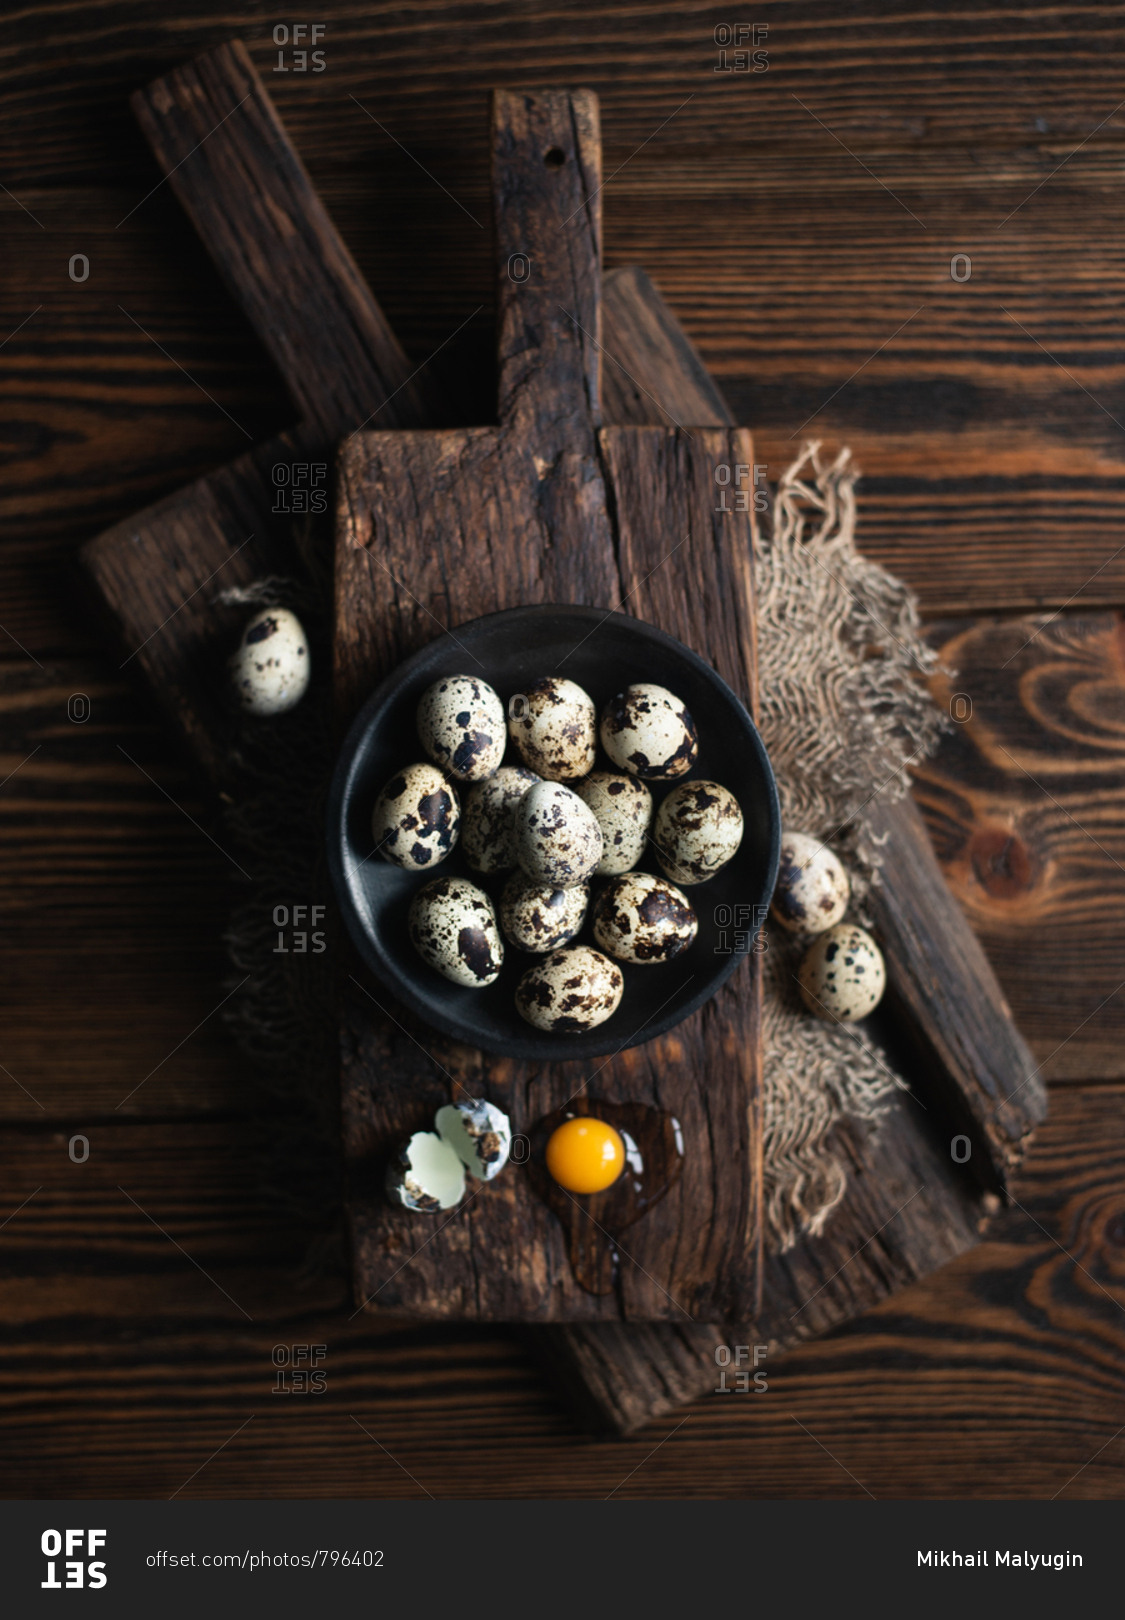 Quail eggs on dark ceramic plate over brown wooden background, view from above